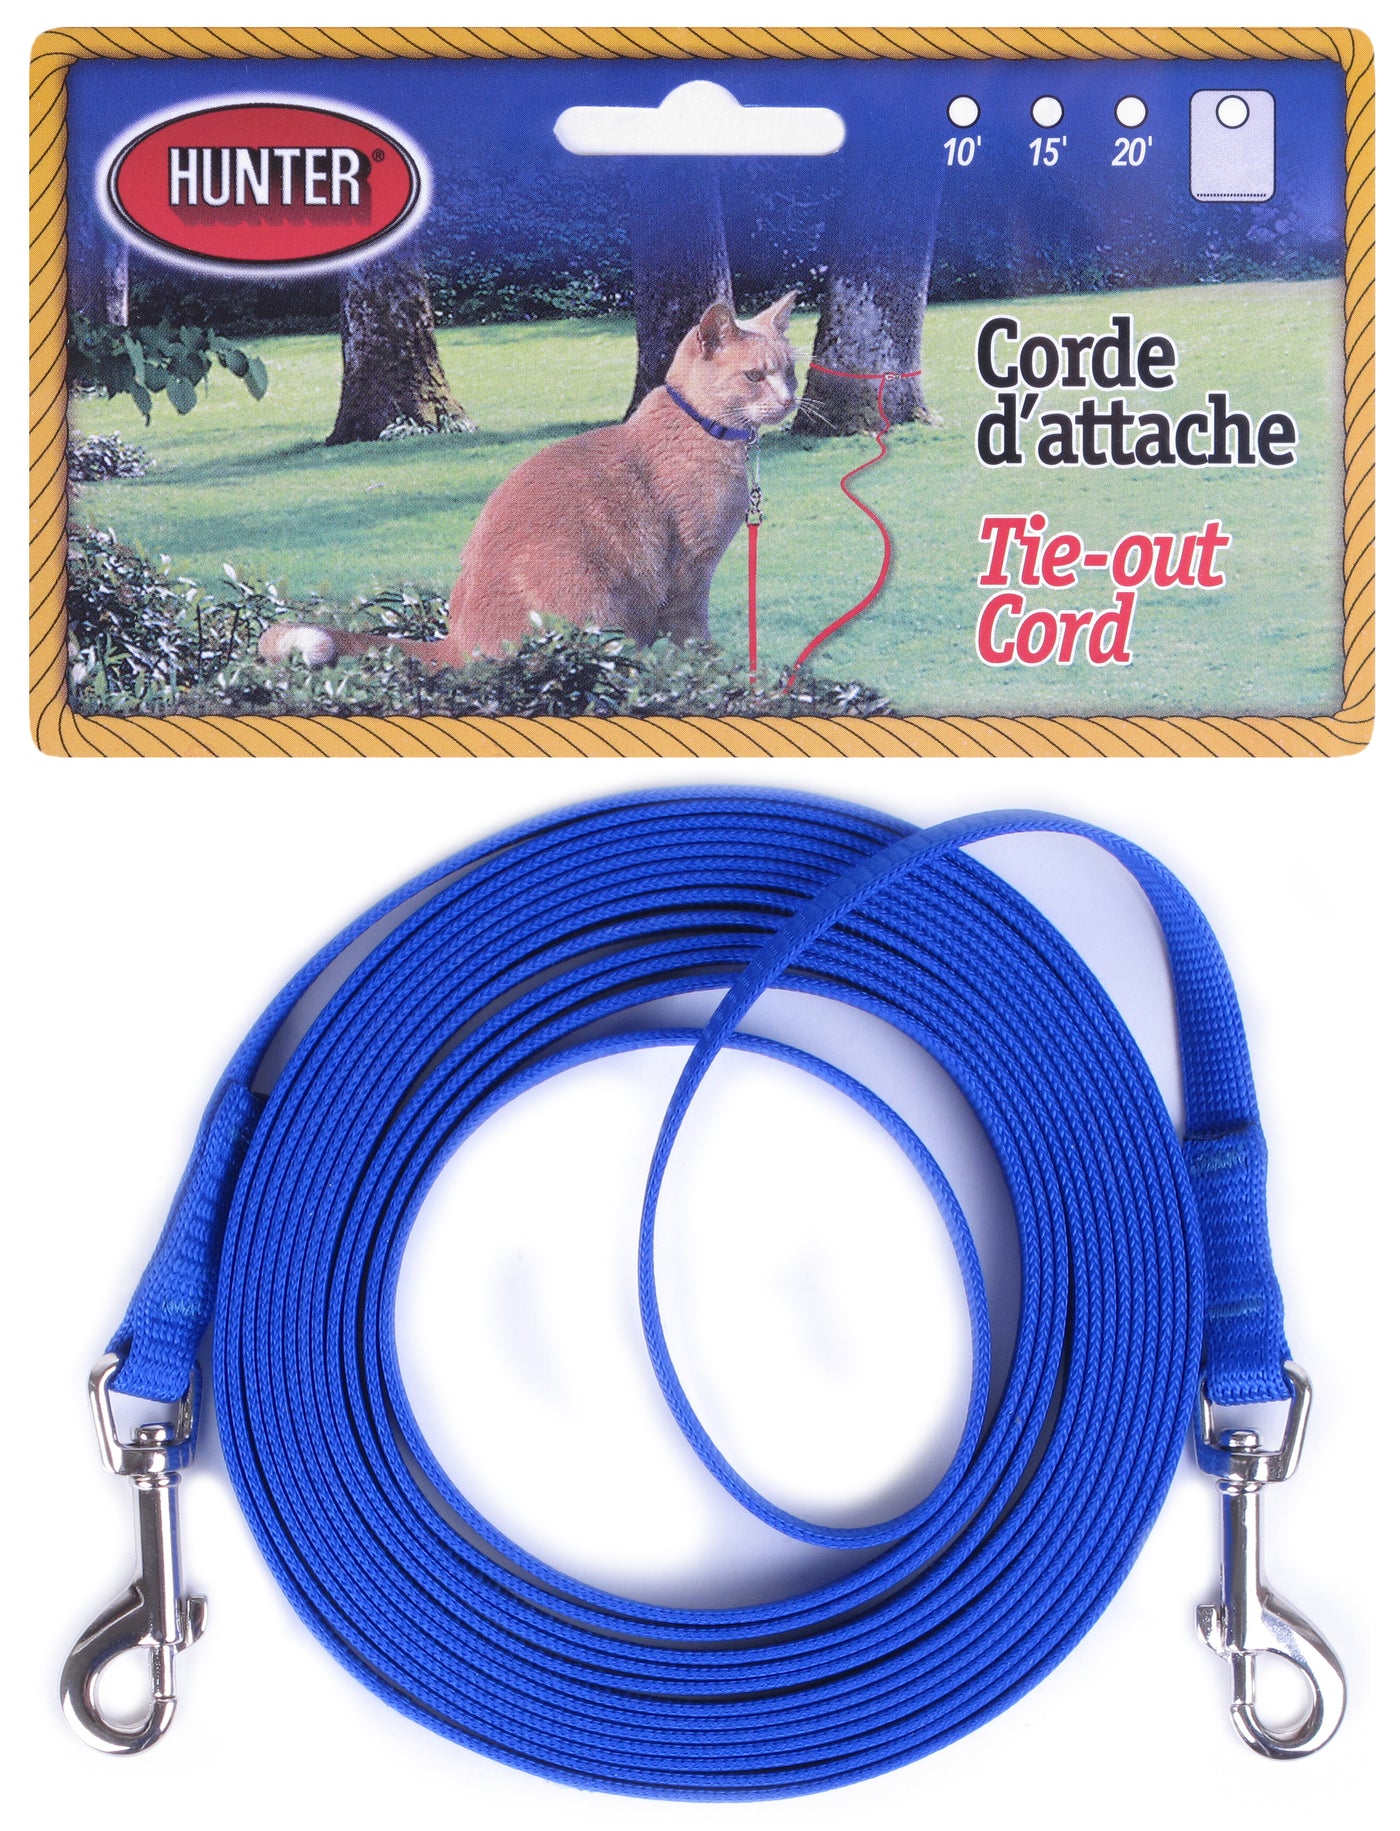 Hunter Brand - Tie-Out Cord for cats